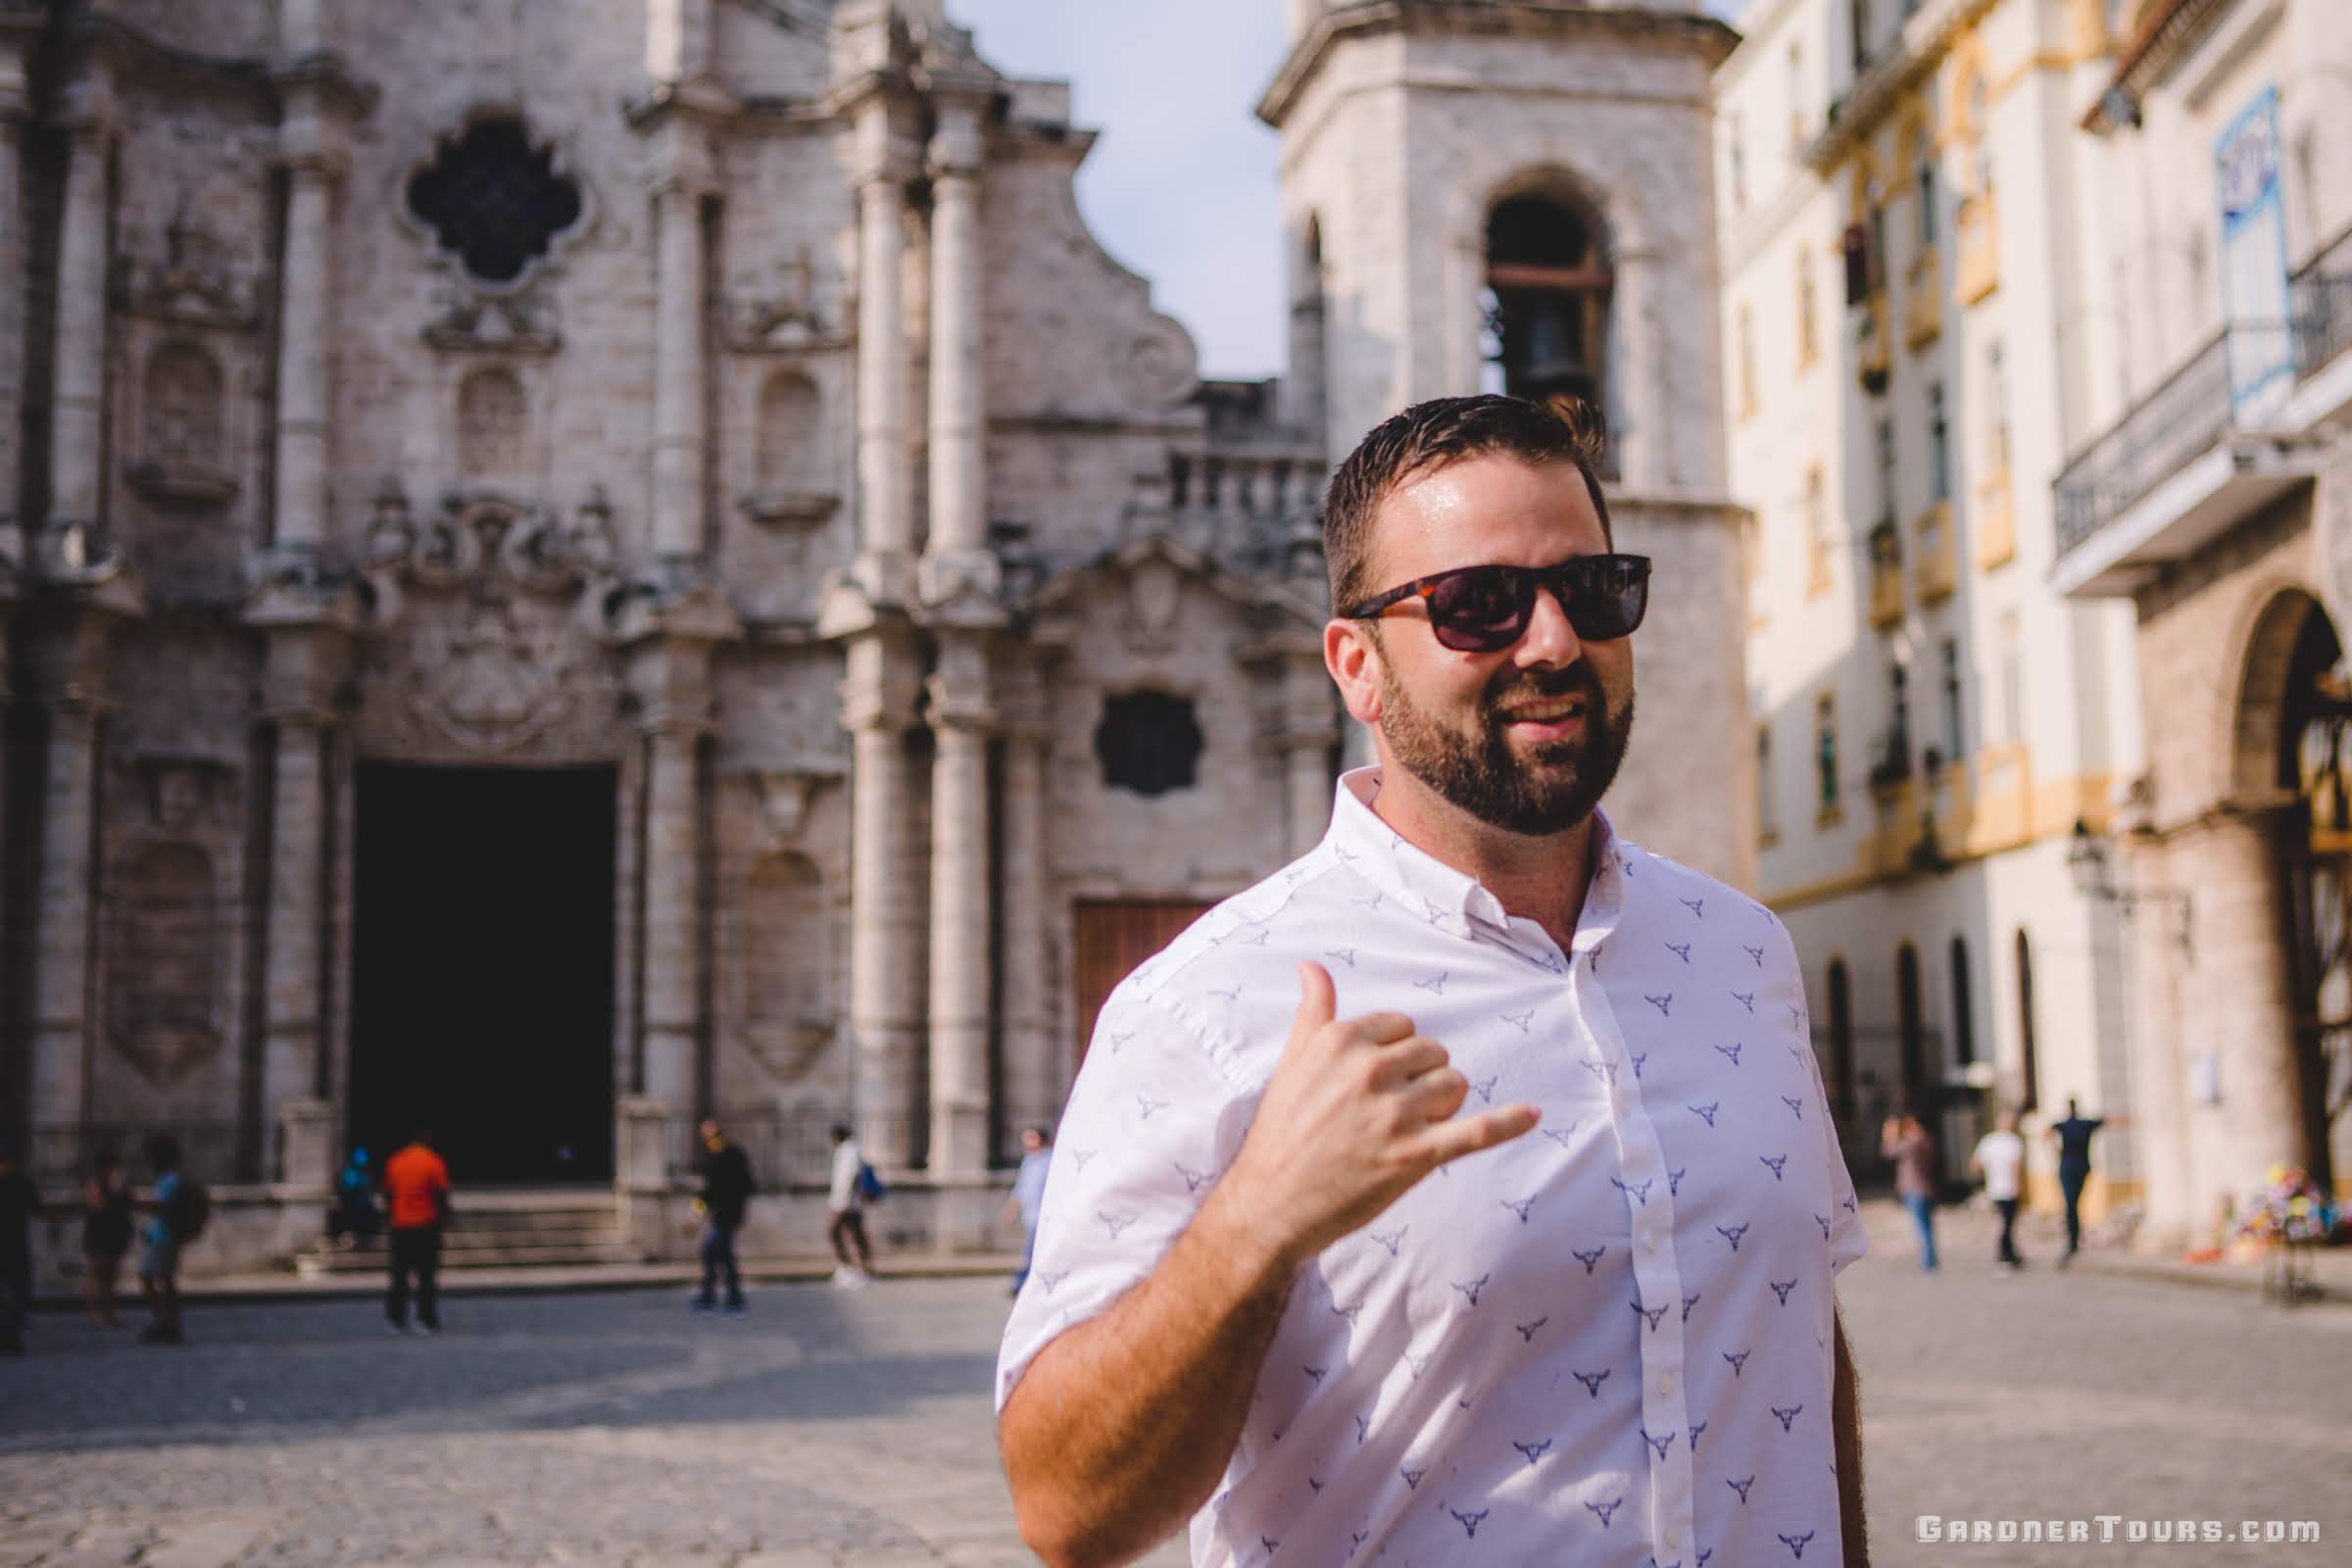 Gardner Tours Owner and Tour Guide Colby Gardner talking about the Cathedral of Havana in Plaza de la Catedral in Old Havana, Cuba